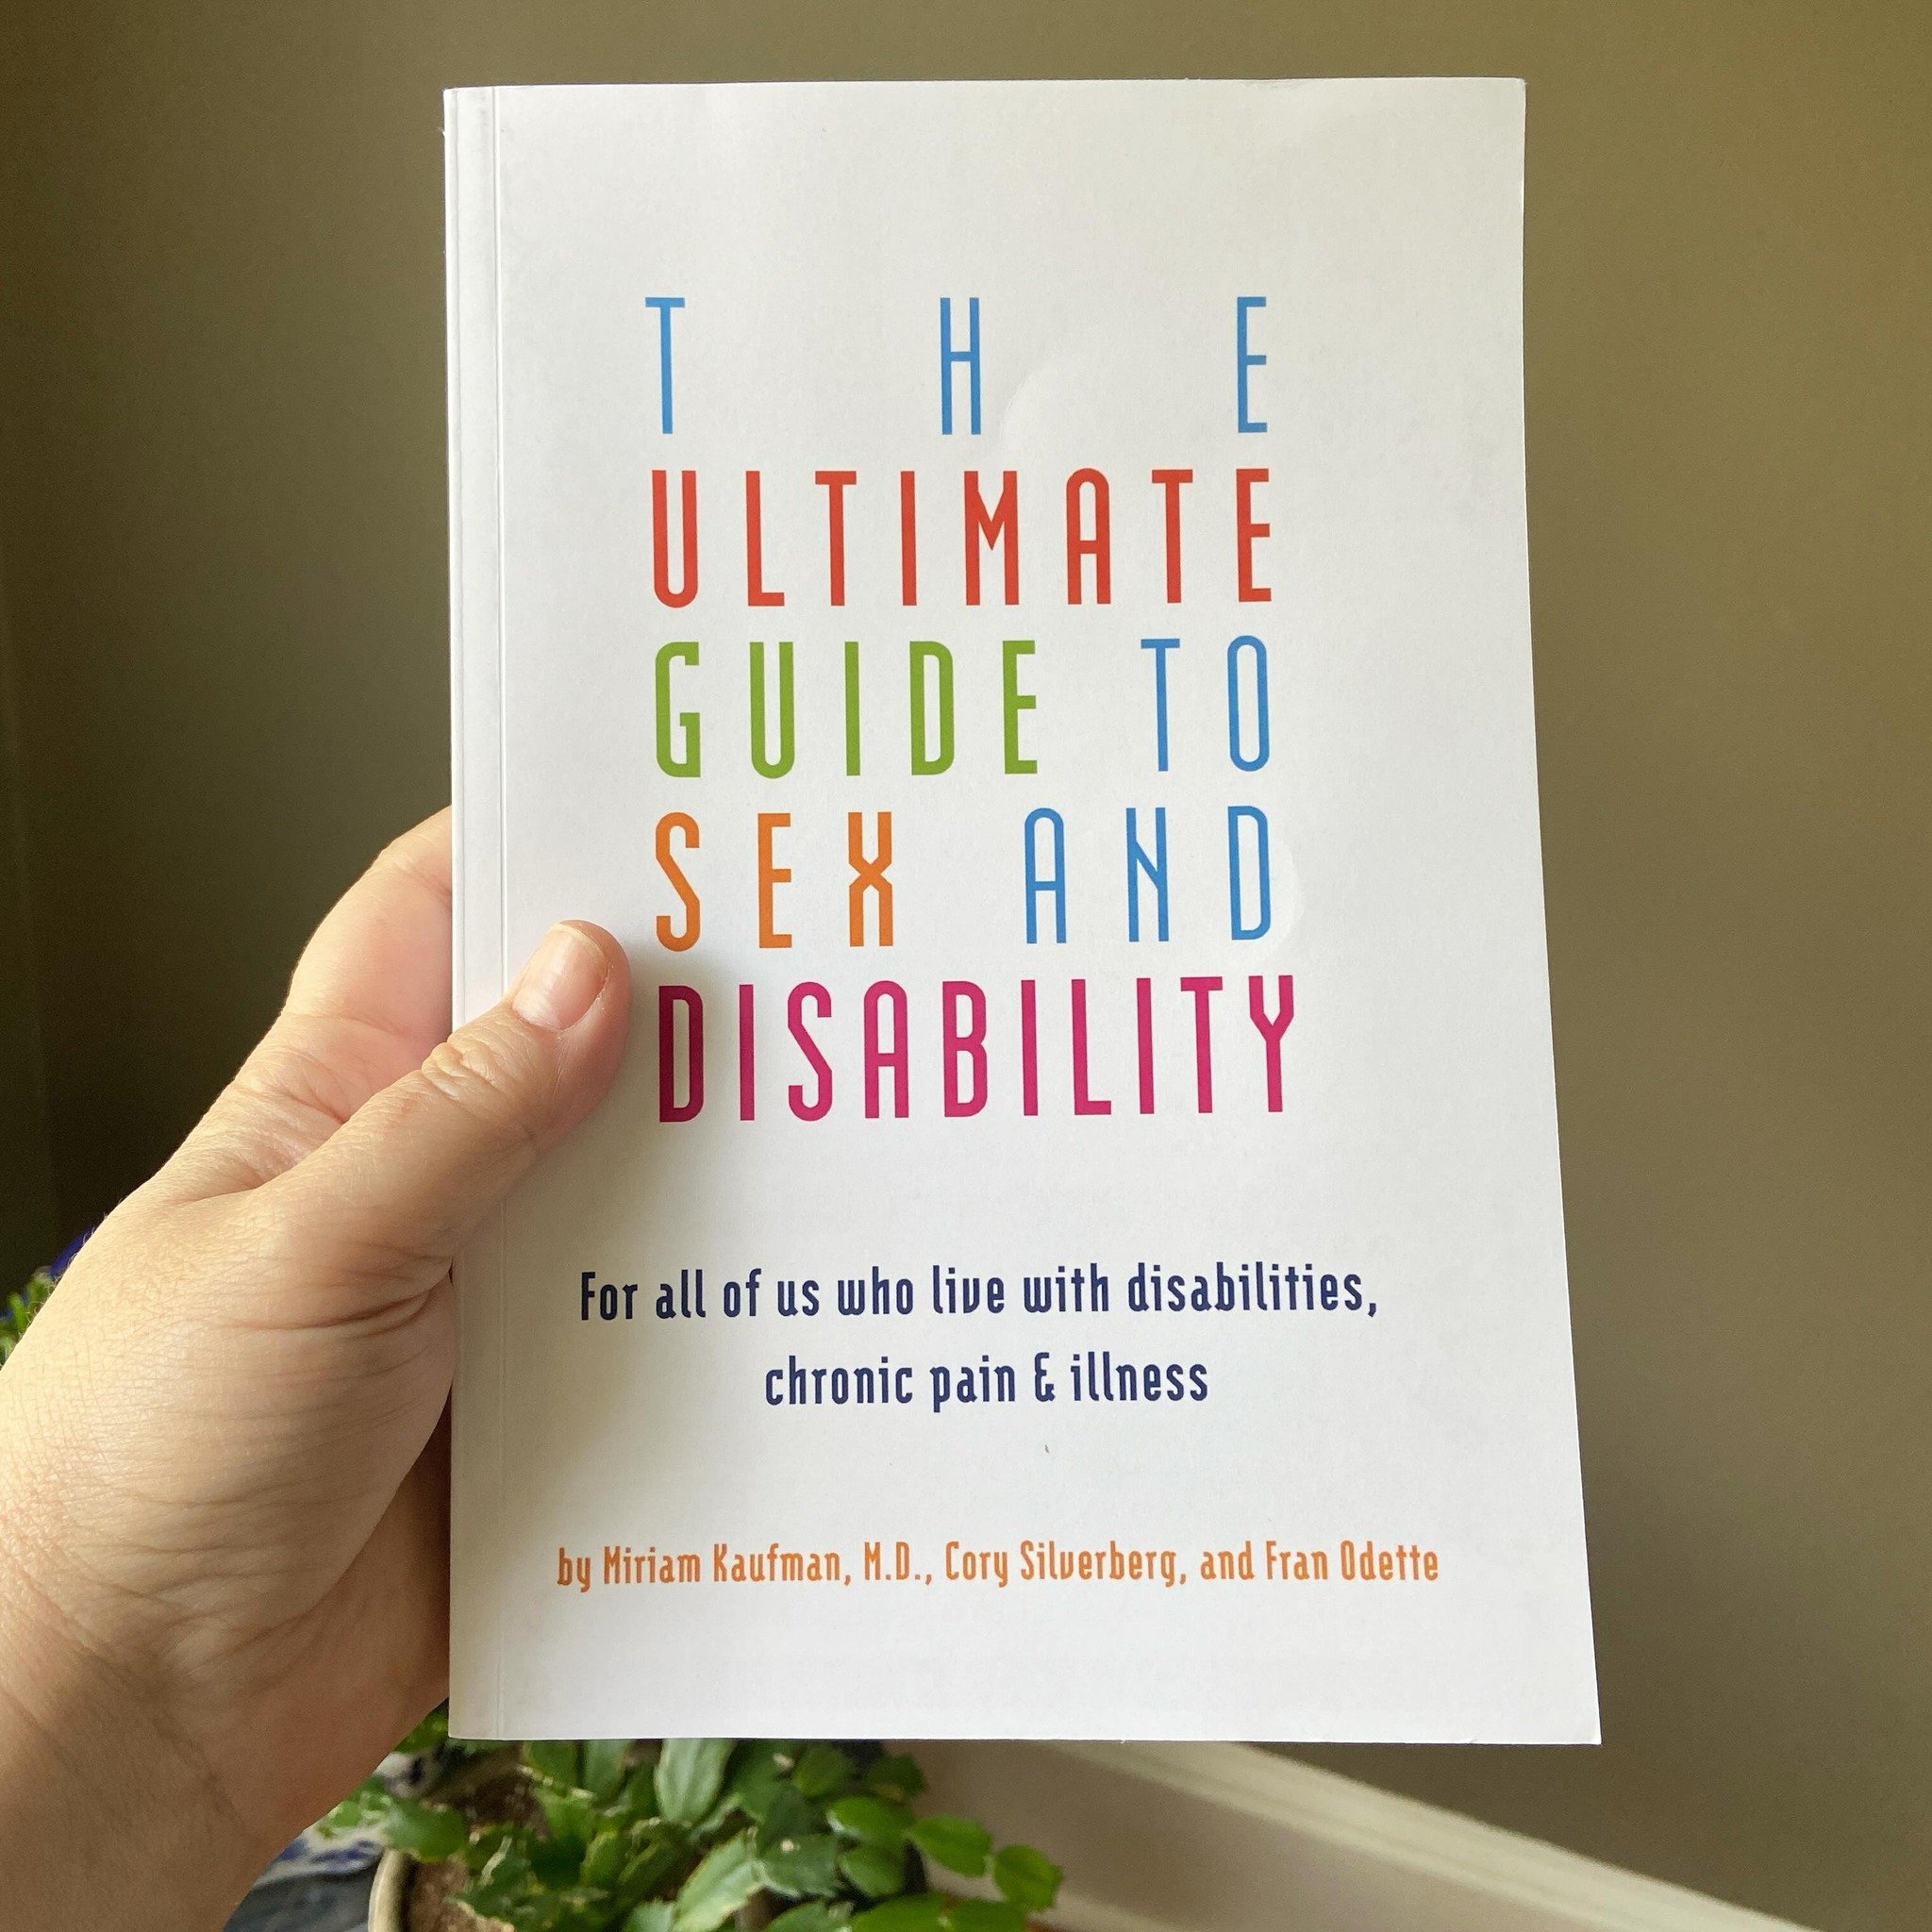 📚 Sex Ed Book Club is reading this for May&rsquo;s meeting. May 16th! Mark your calendars and don&rsquo;t forget to register to join us in this discussion!

🥄Please share with anyone you think would enjoy this book. 

#sexanddisability #disability 